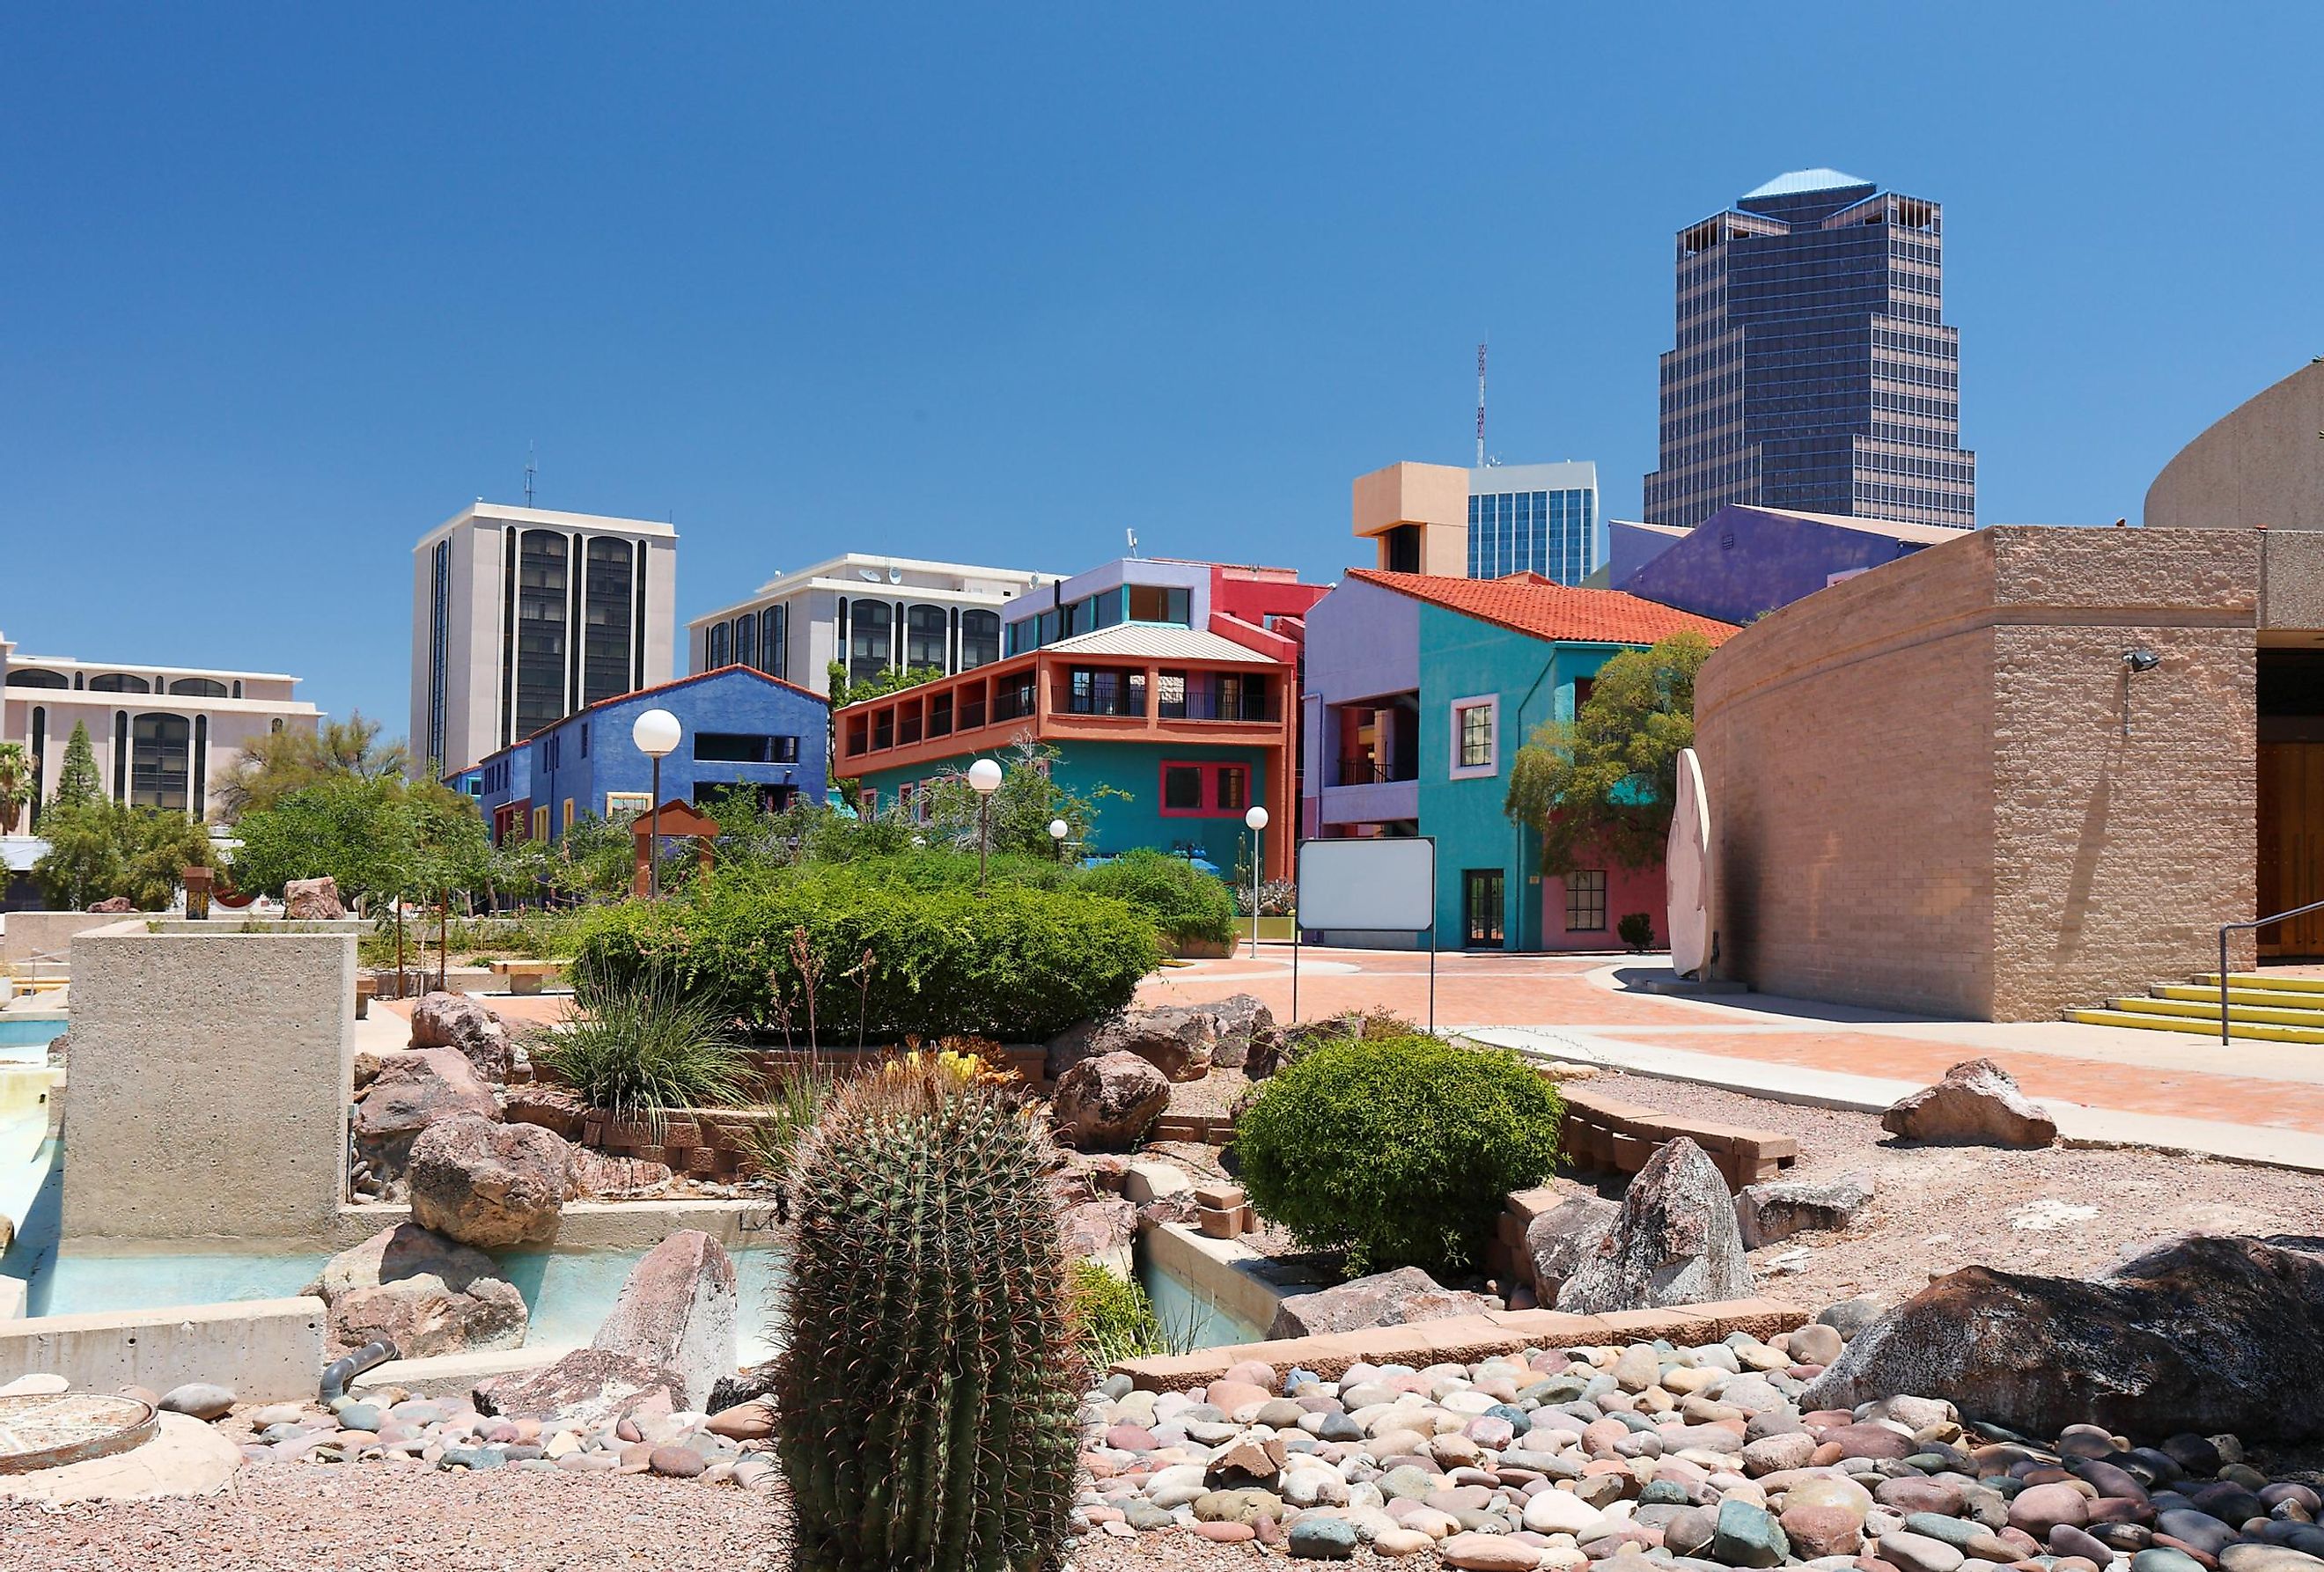 Tucson Skyline Showing the Colorful Building at La Placita Park, Cactus and UniSource Energy Tower.